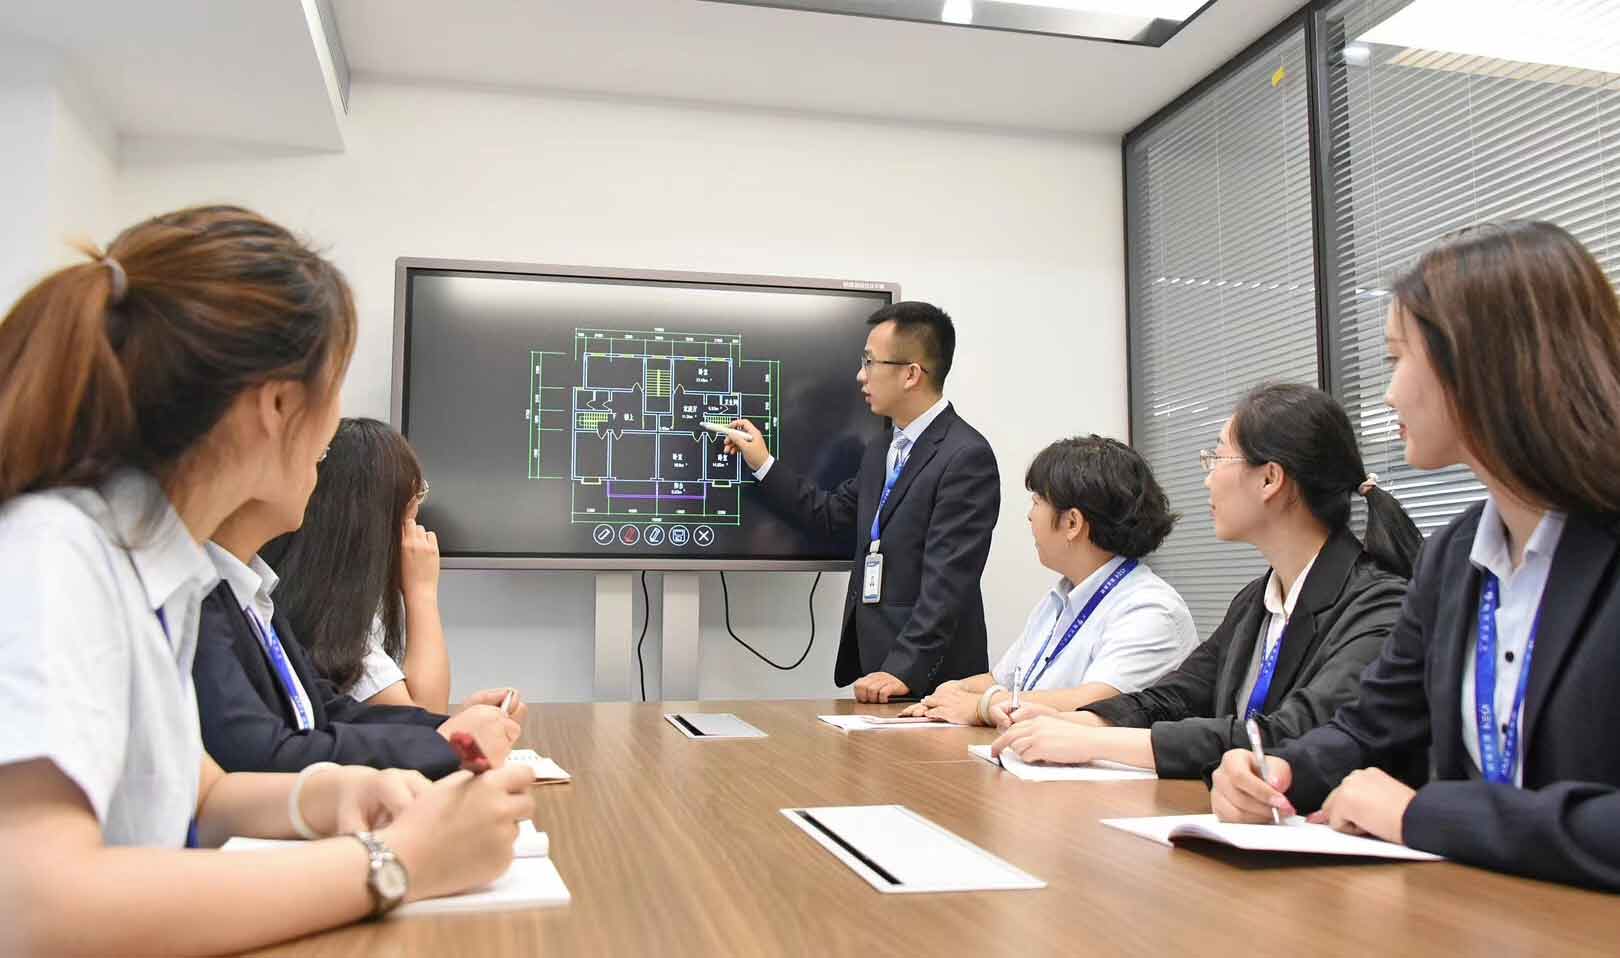 How Qeoyo interactive smart board can help you stay organized and productive